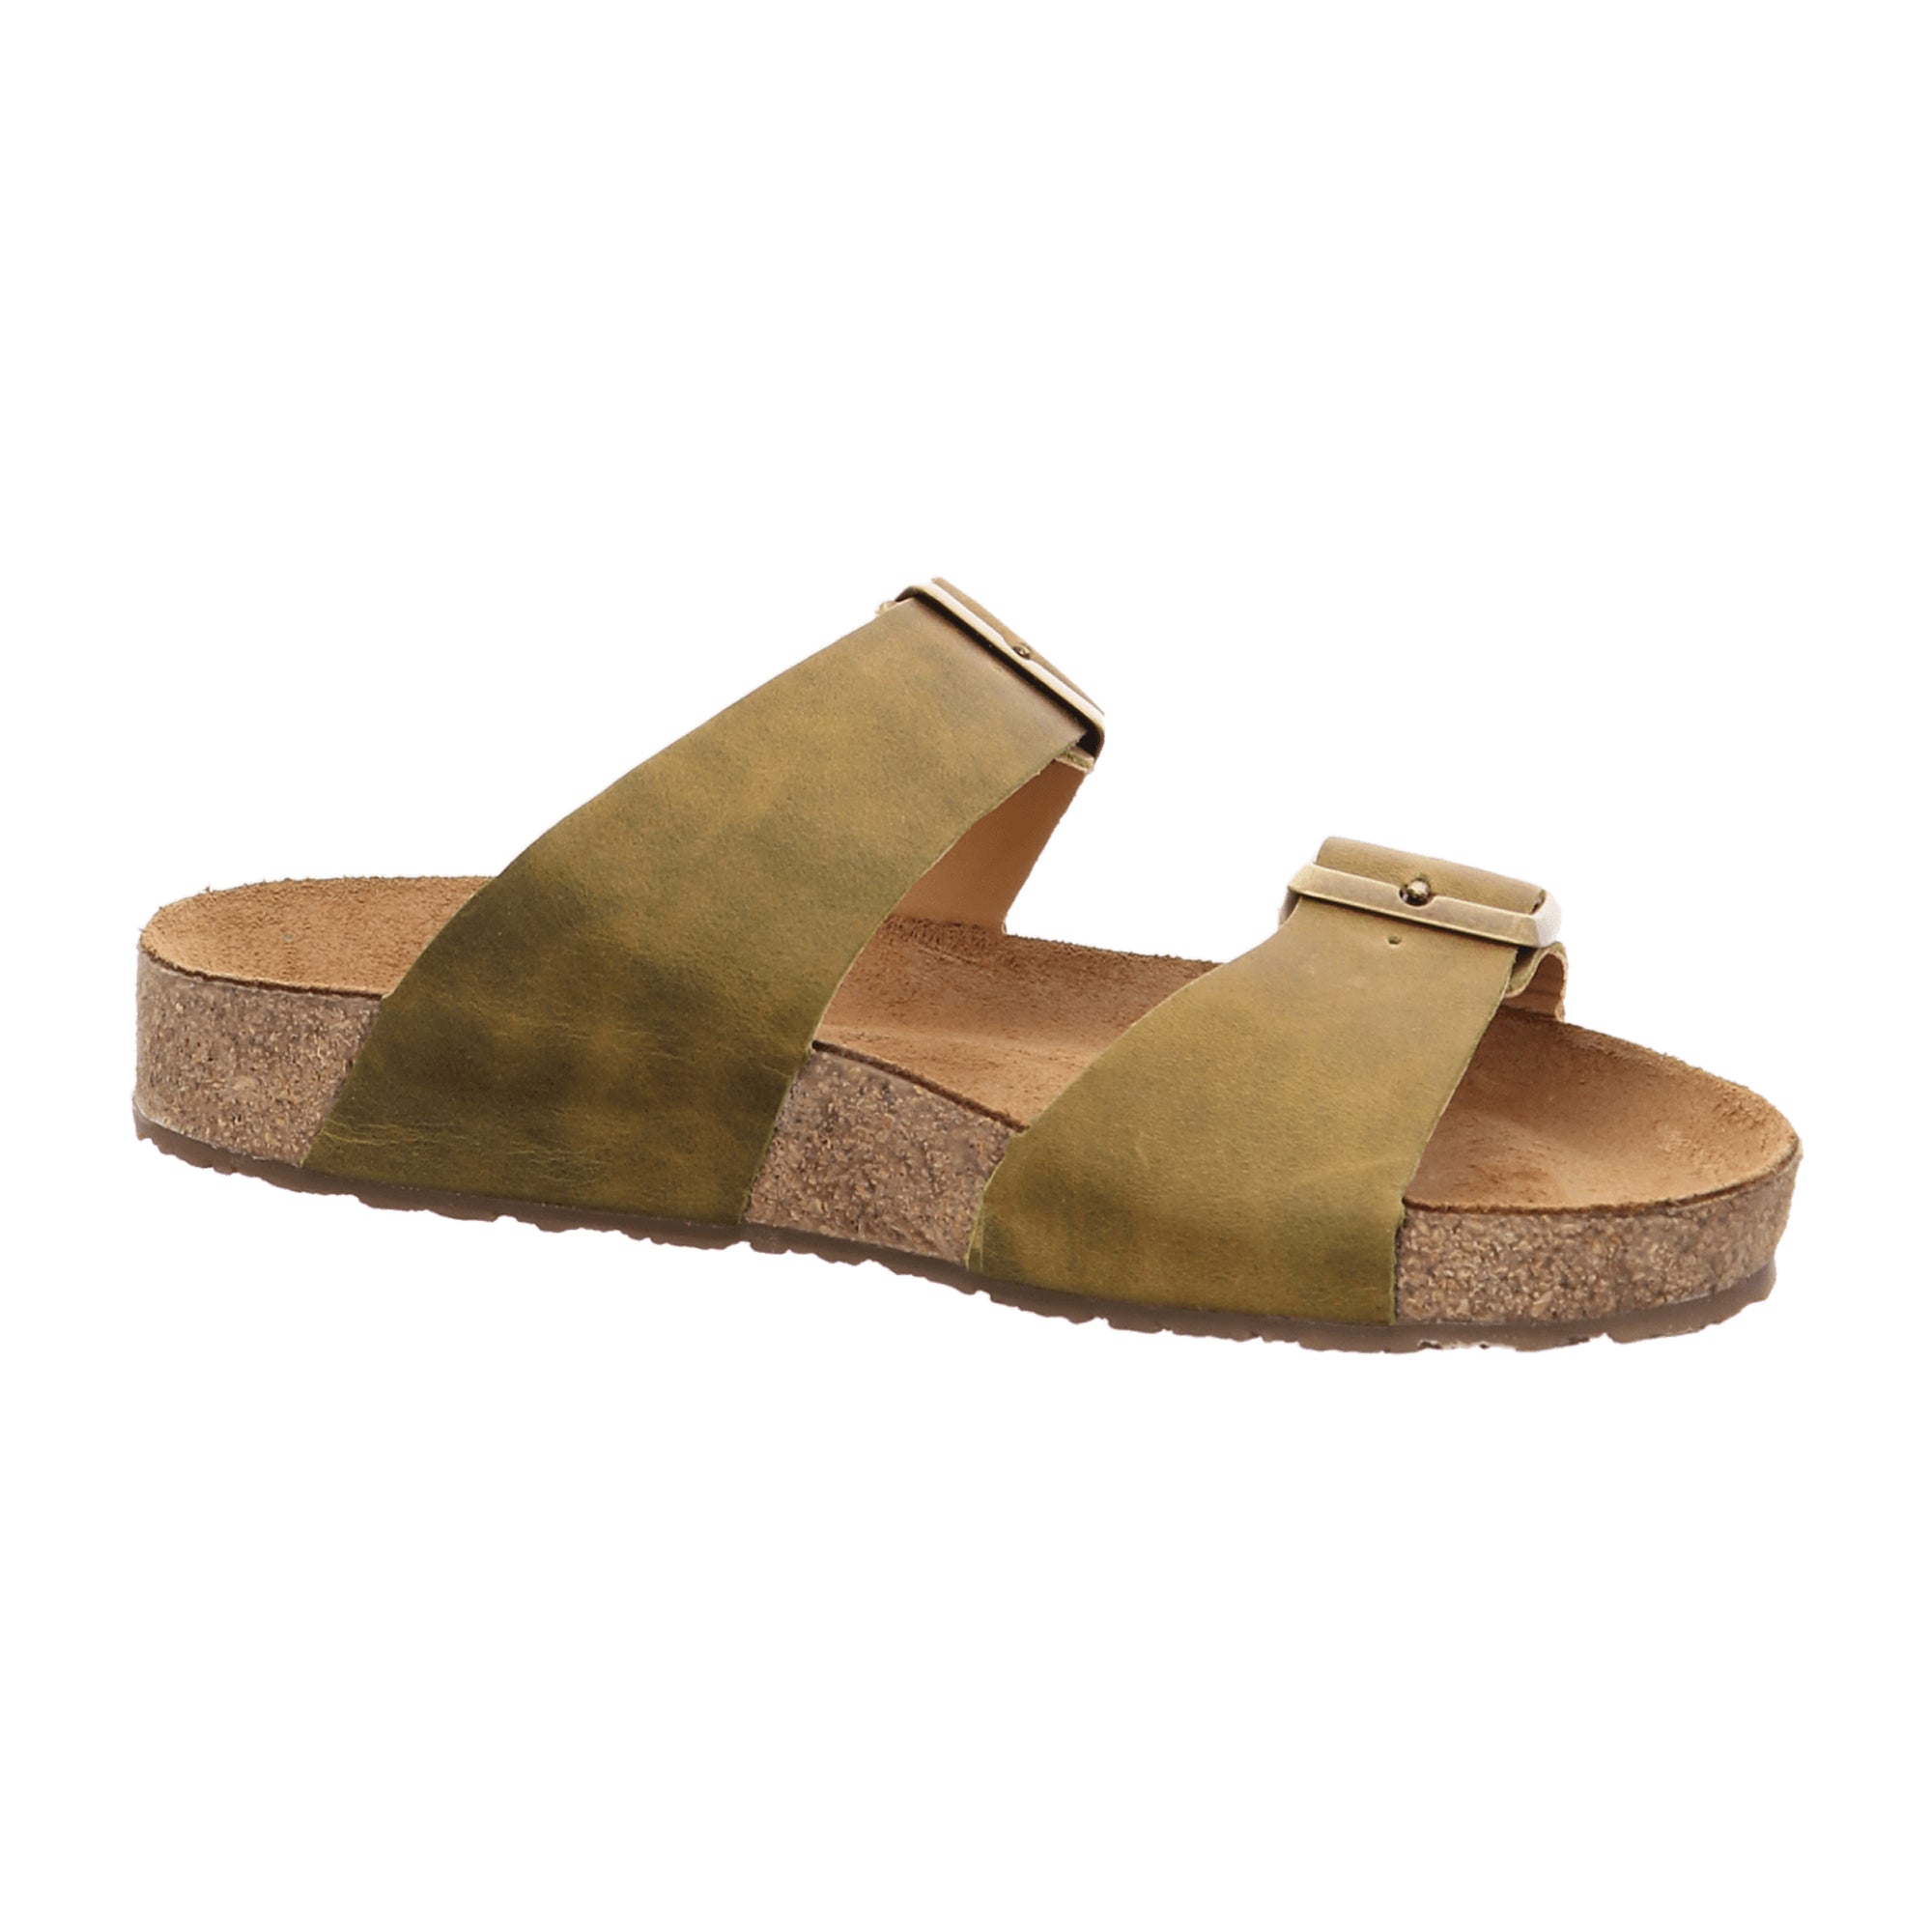 Haflinger Andrea Women's Olive Sandals - Durable and Stylish